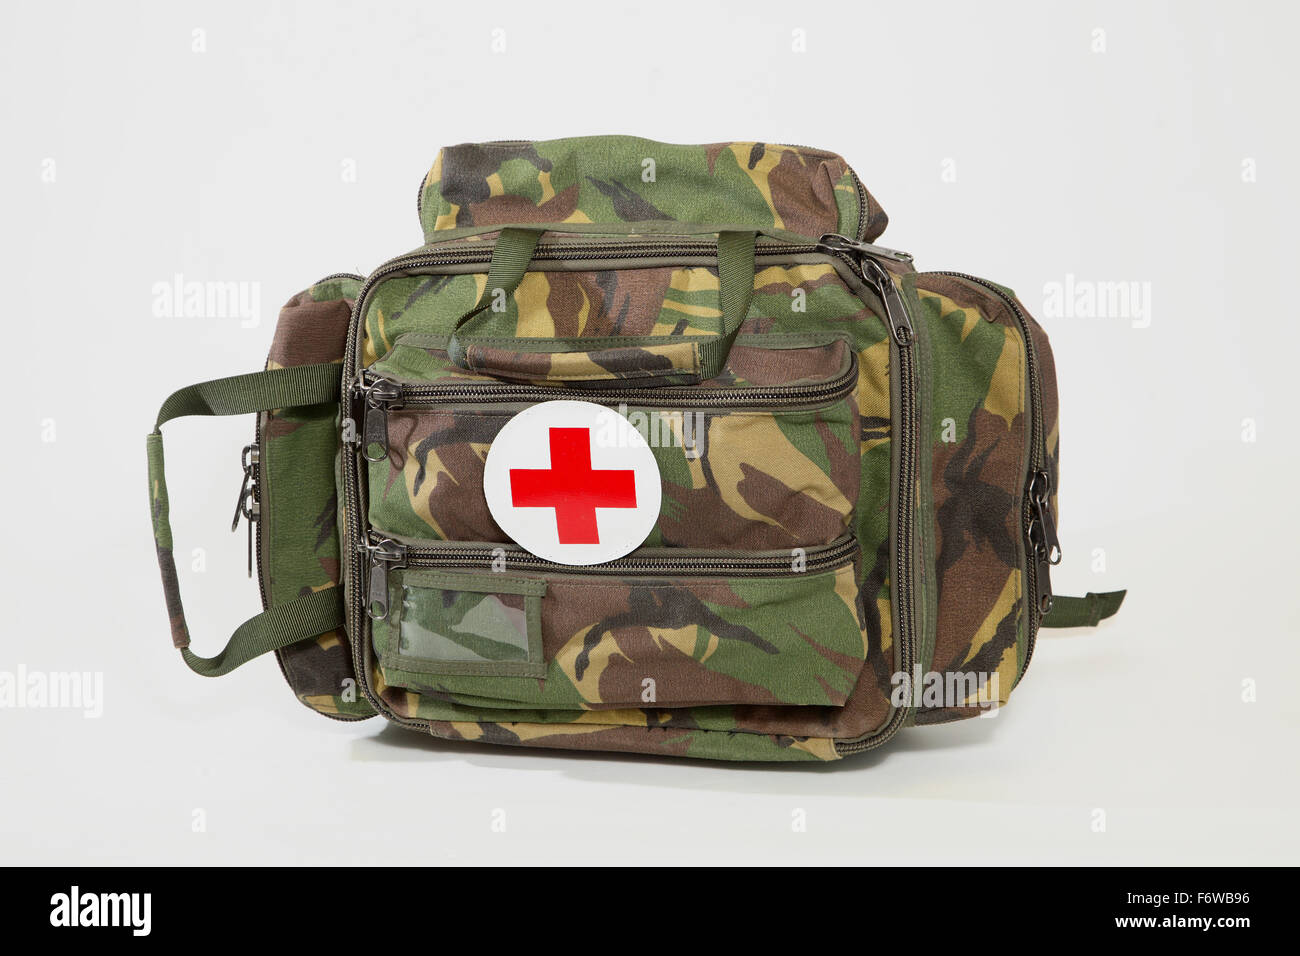 studio picture of a British army first aid pack in jungle camouflage fabric Stock Photo